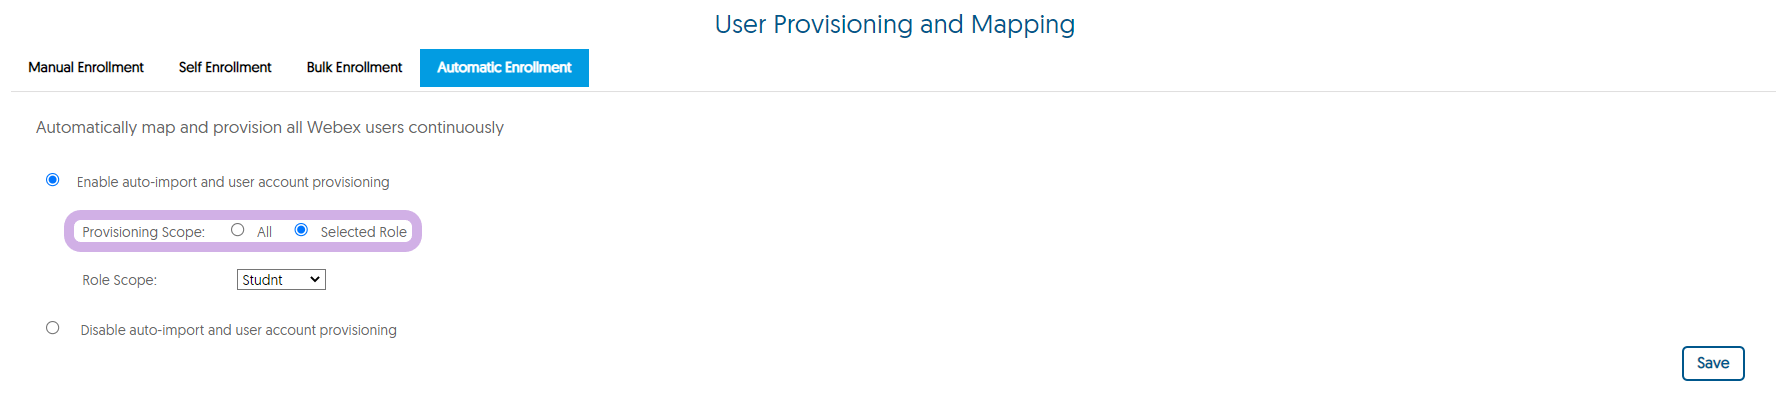 The User Provisioning and Mapping panel for Webex with Provisioning Scope set to Selected Role from Automatic Enrollment.